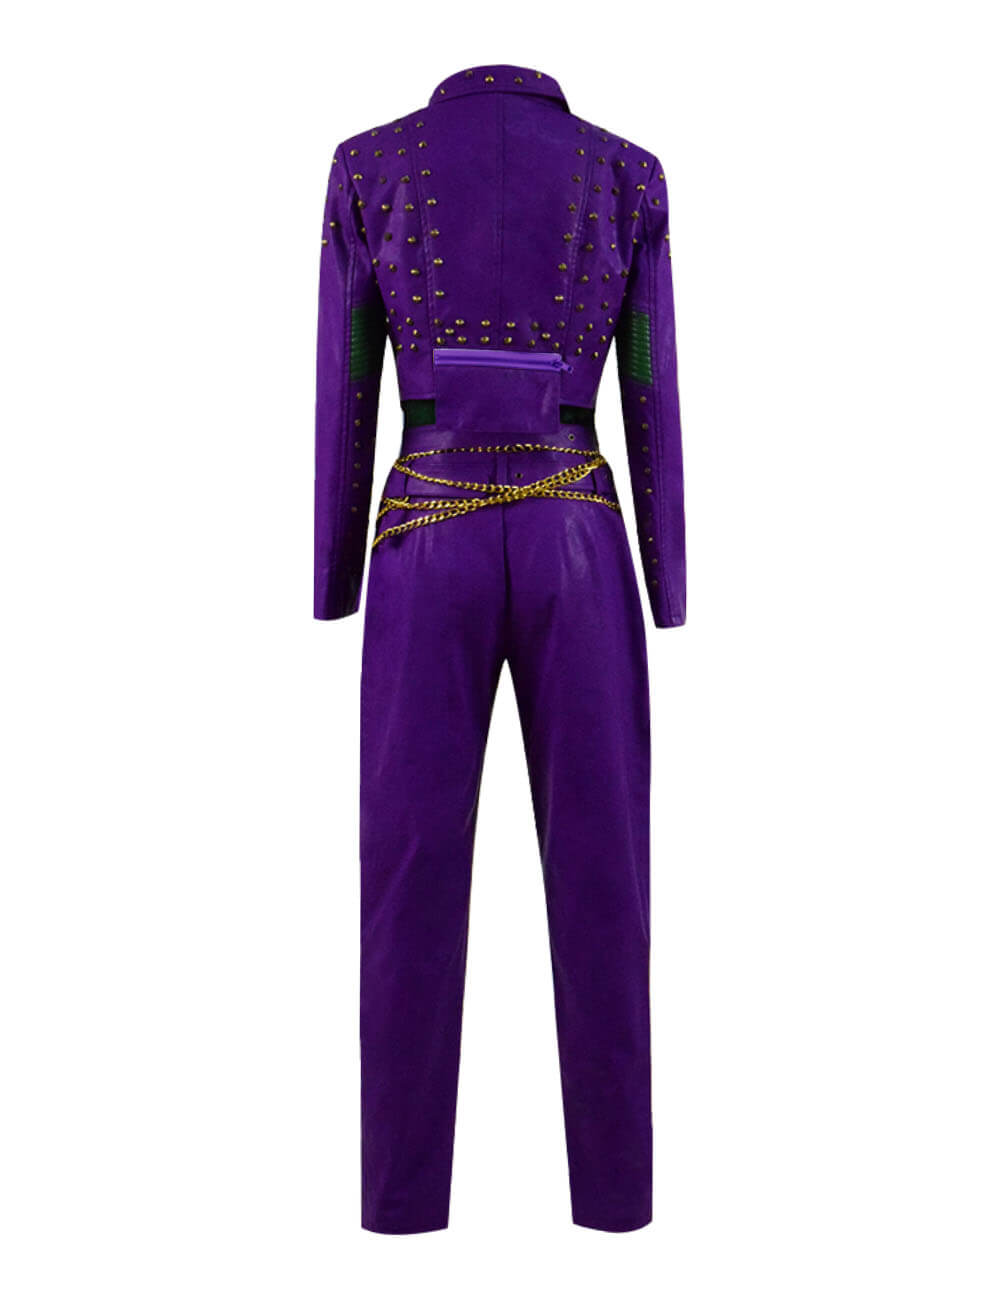 Disney Descendants Costumes Mal Dress Outfit Kids Adults Halloween Party Cosplay Costume - ACcosplay